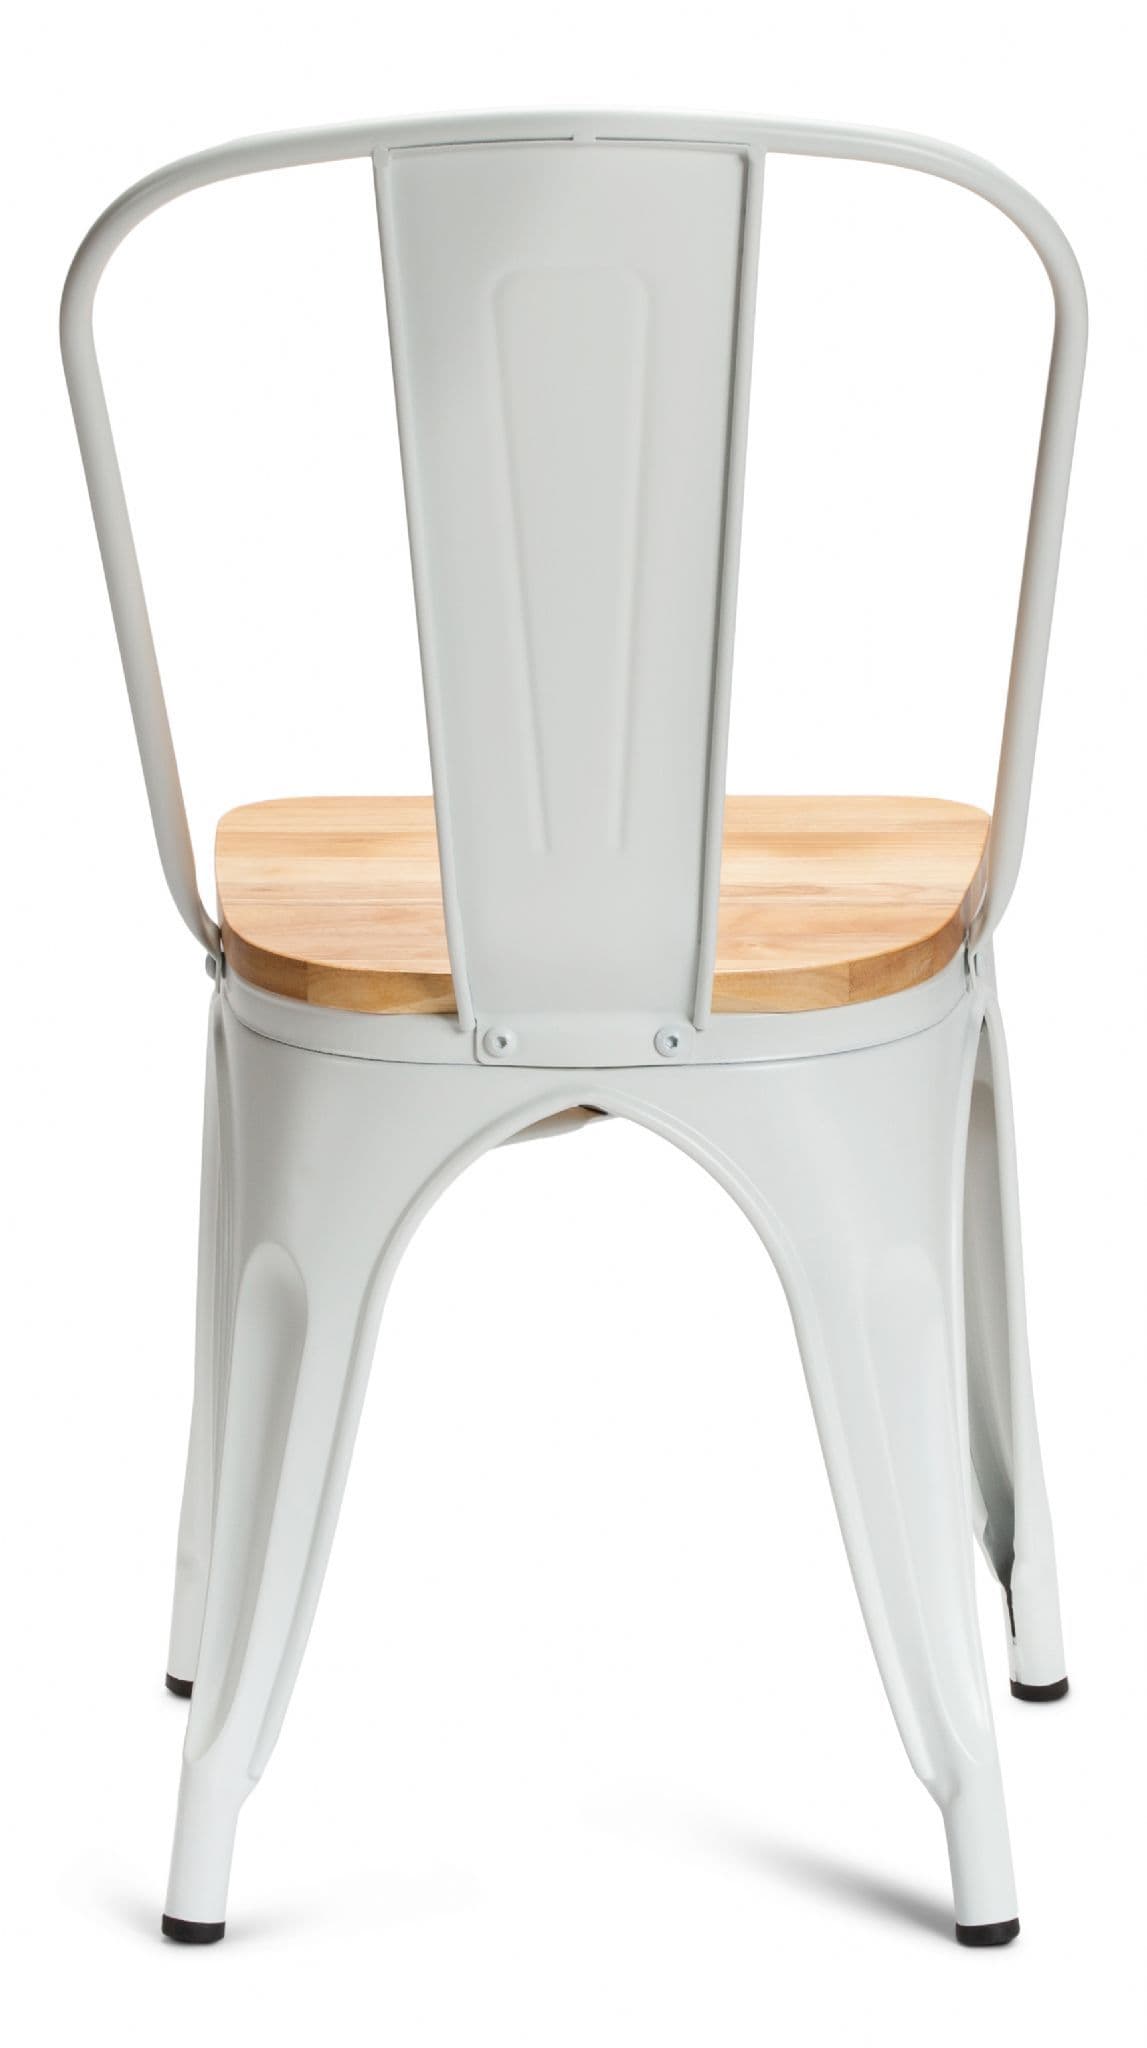 Matt White With Oak Seat Metal Industrial Tolix Style Dining Chairs Rear View